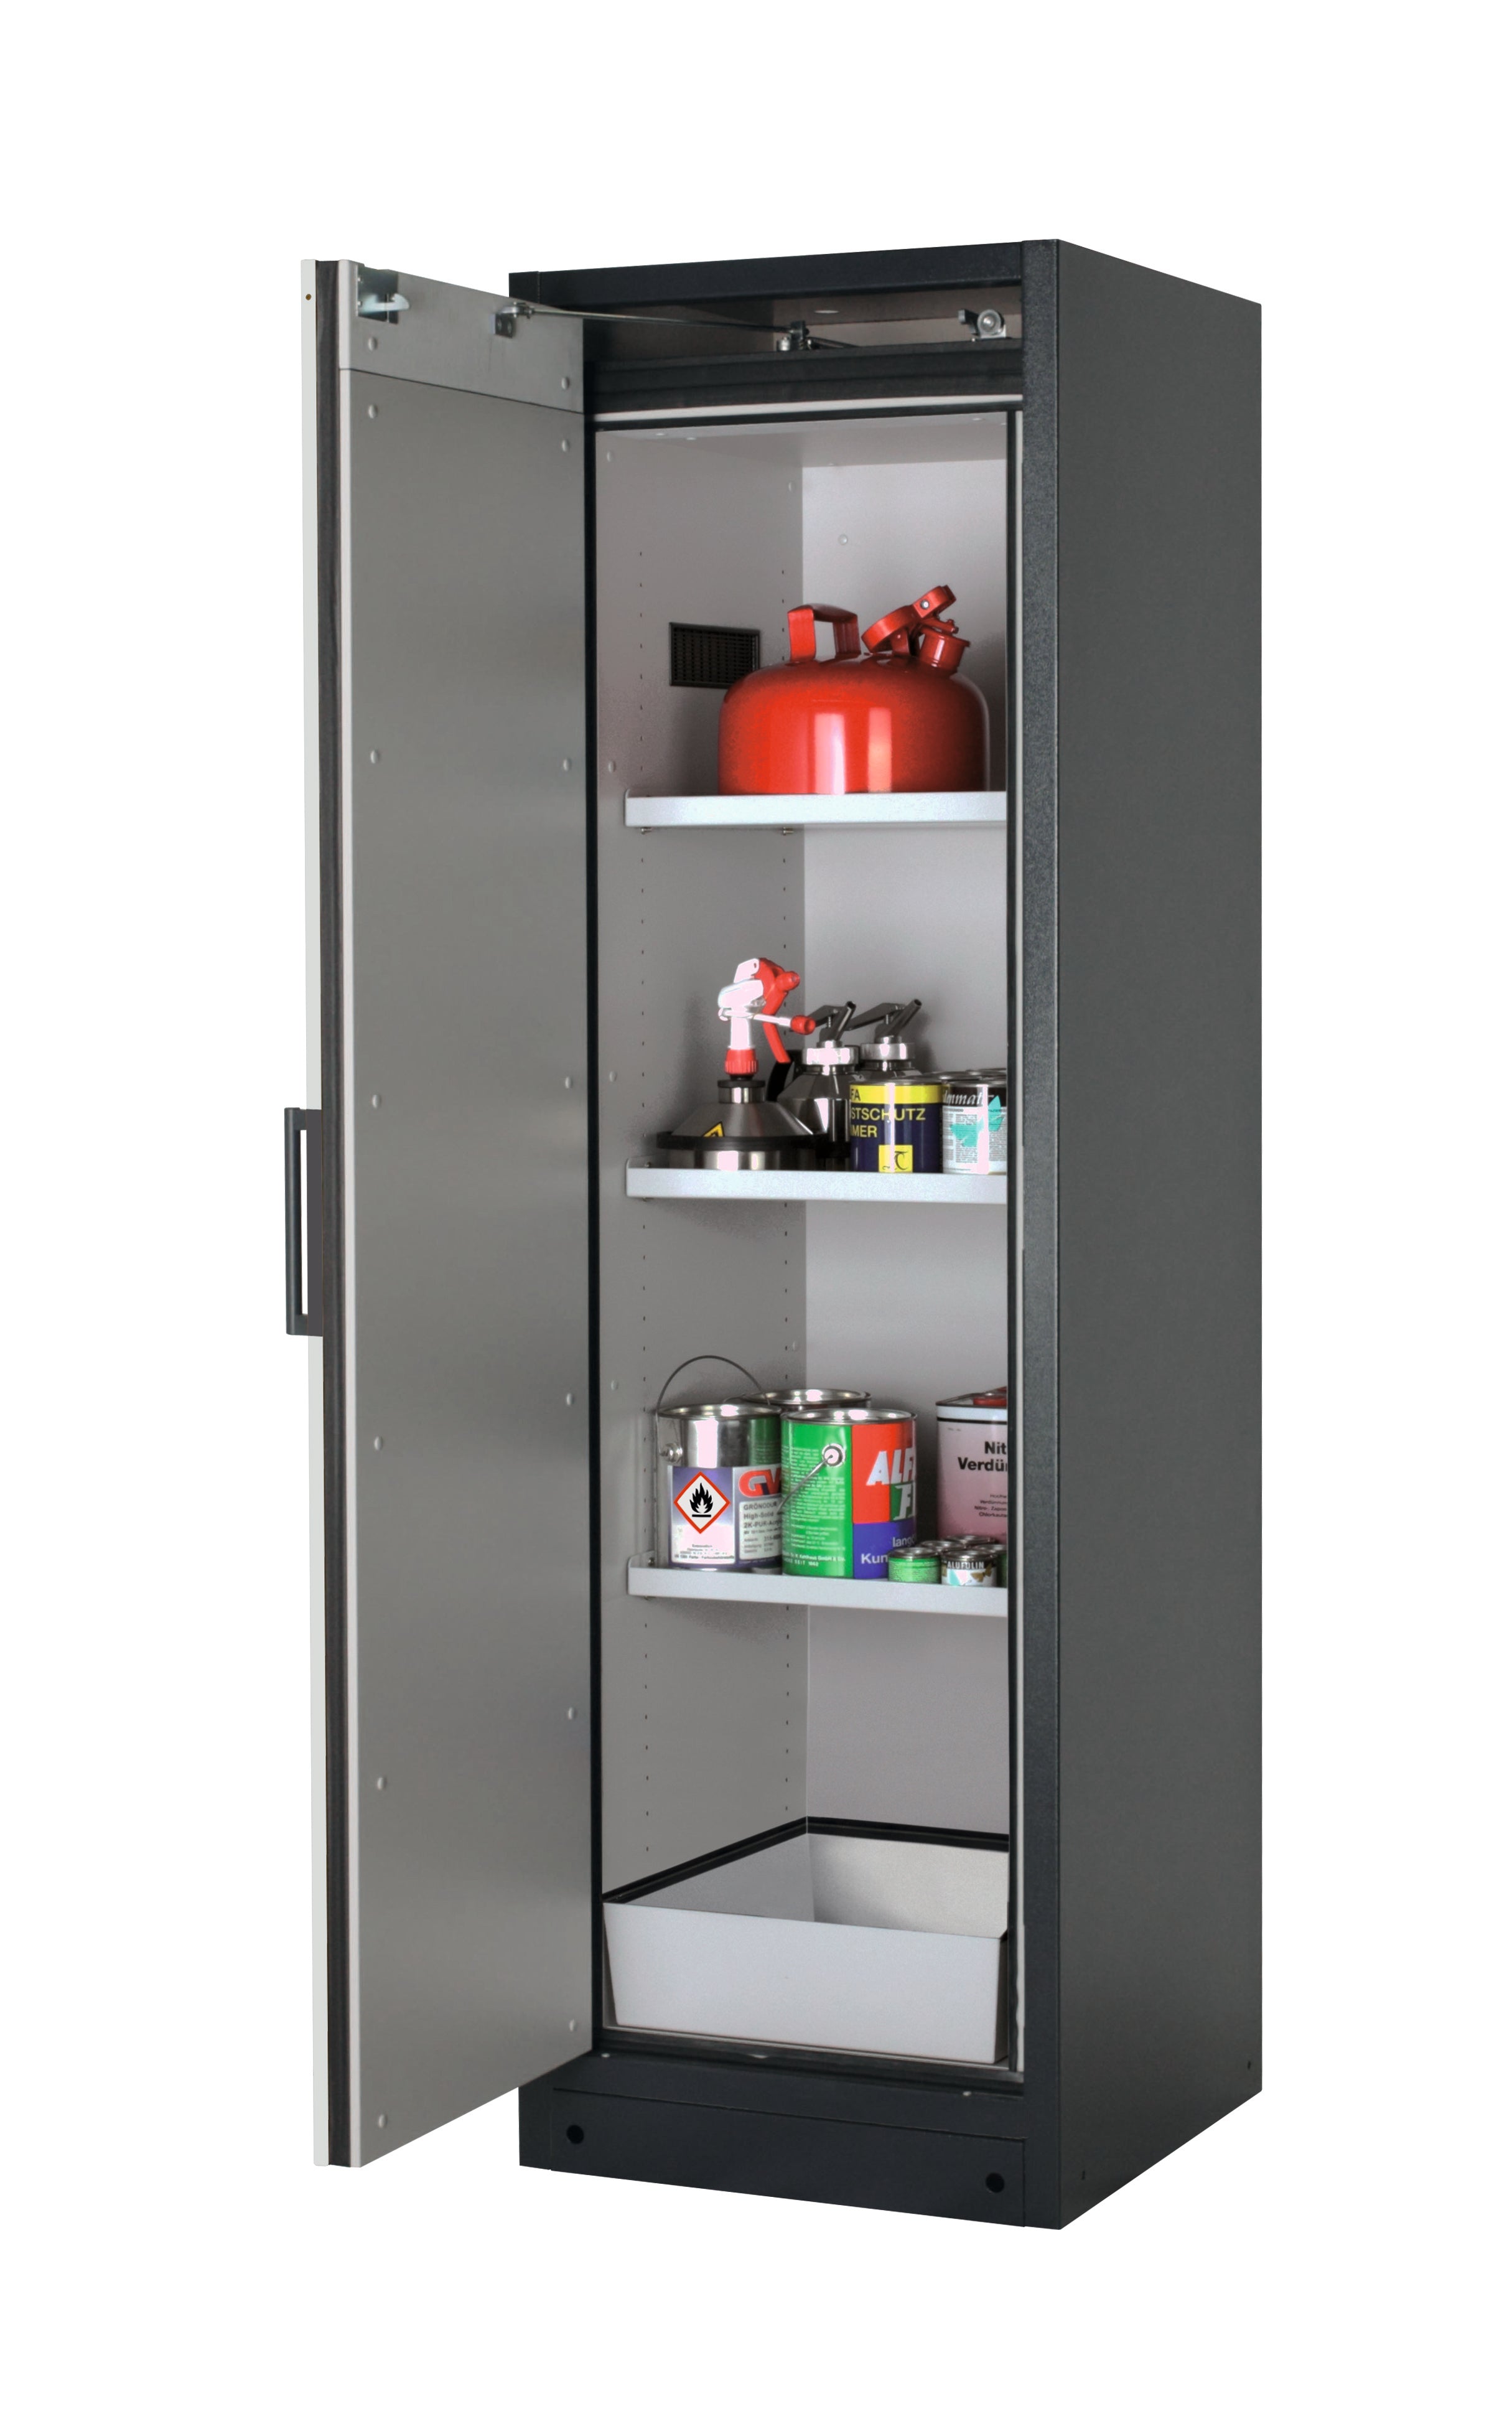 Type 90 safety storage cabinet Q-CLASSIC-90 model Q90.195.060 in light grey RAL 7035 with 3x shelf standard (sheet steel),